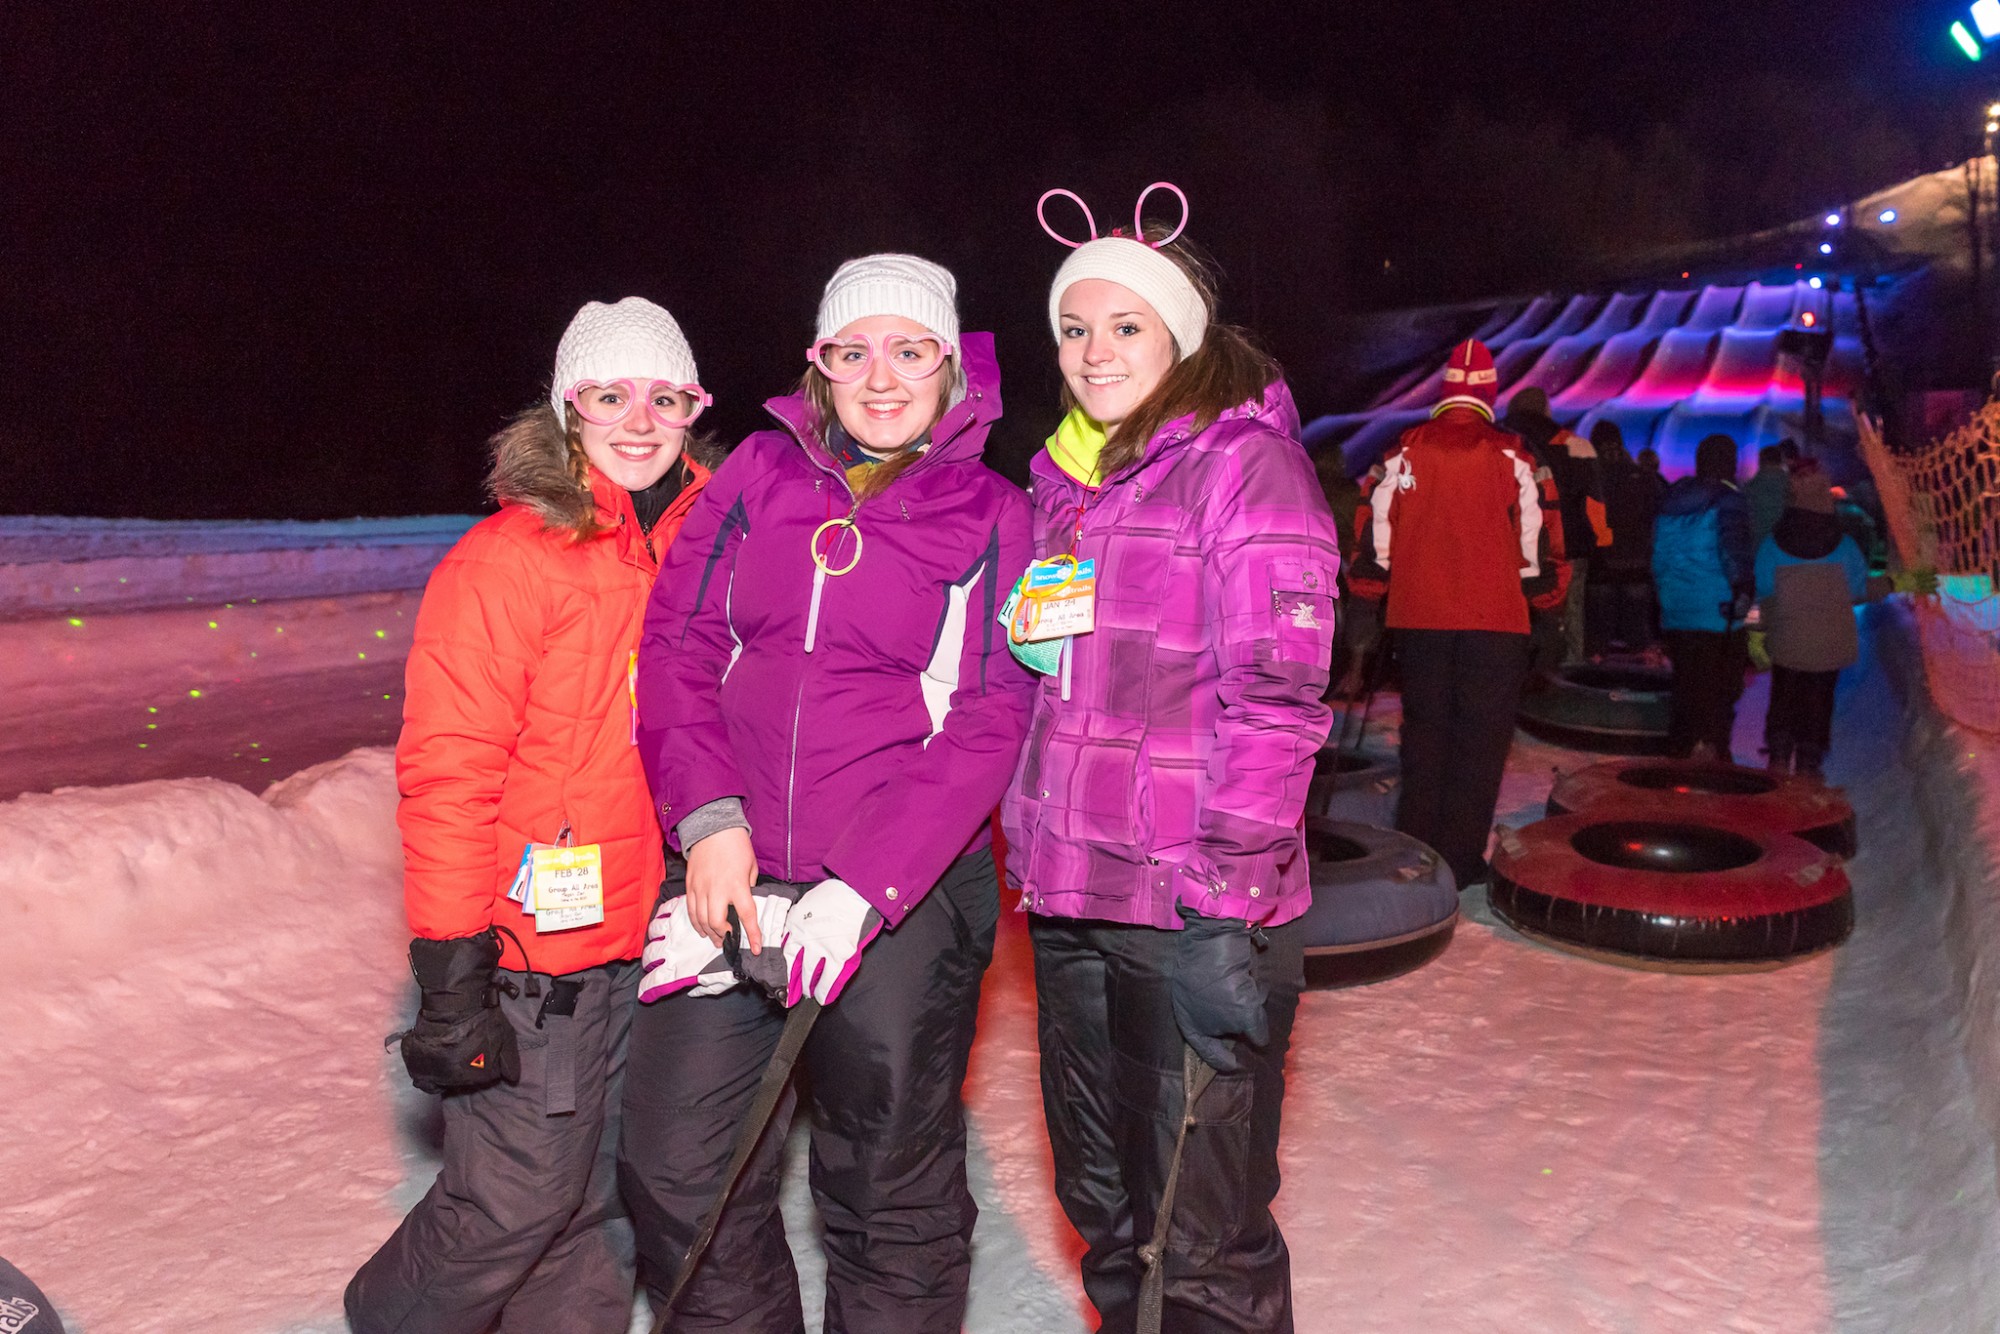 Late Night Glow Tubing with Friends at Snow Trails Vertical Descent Tubing Park